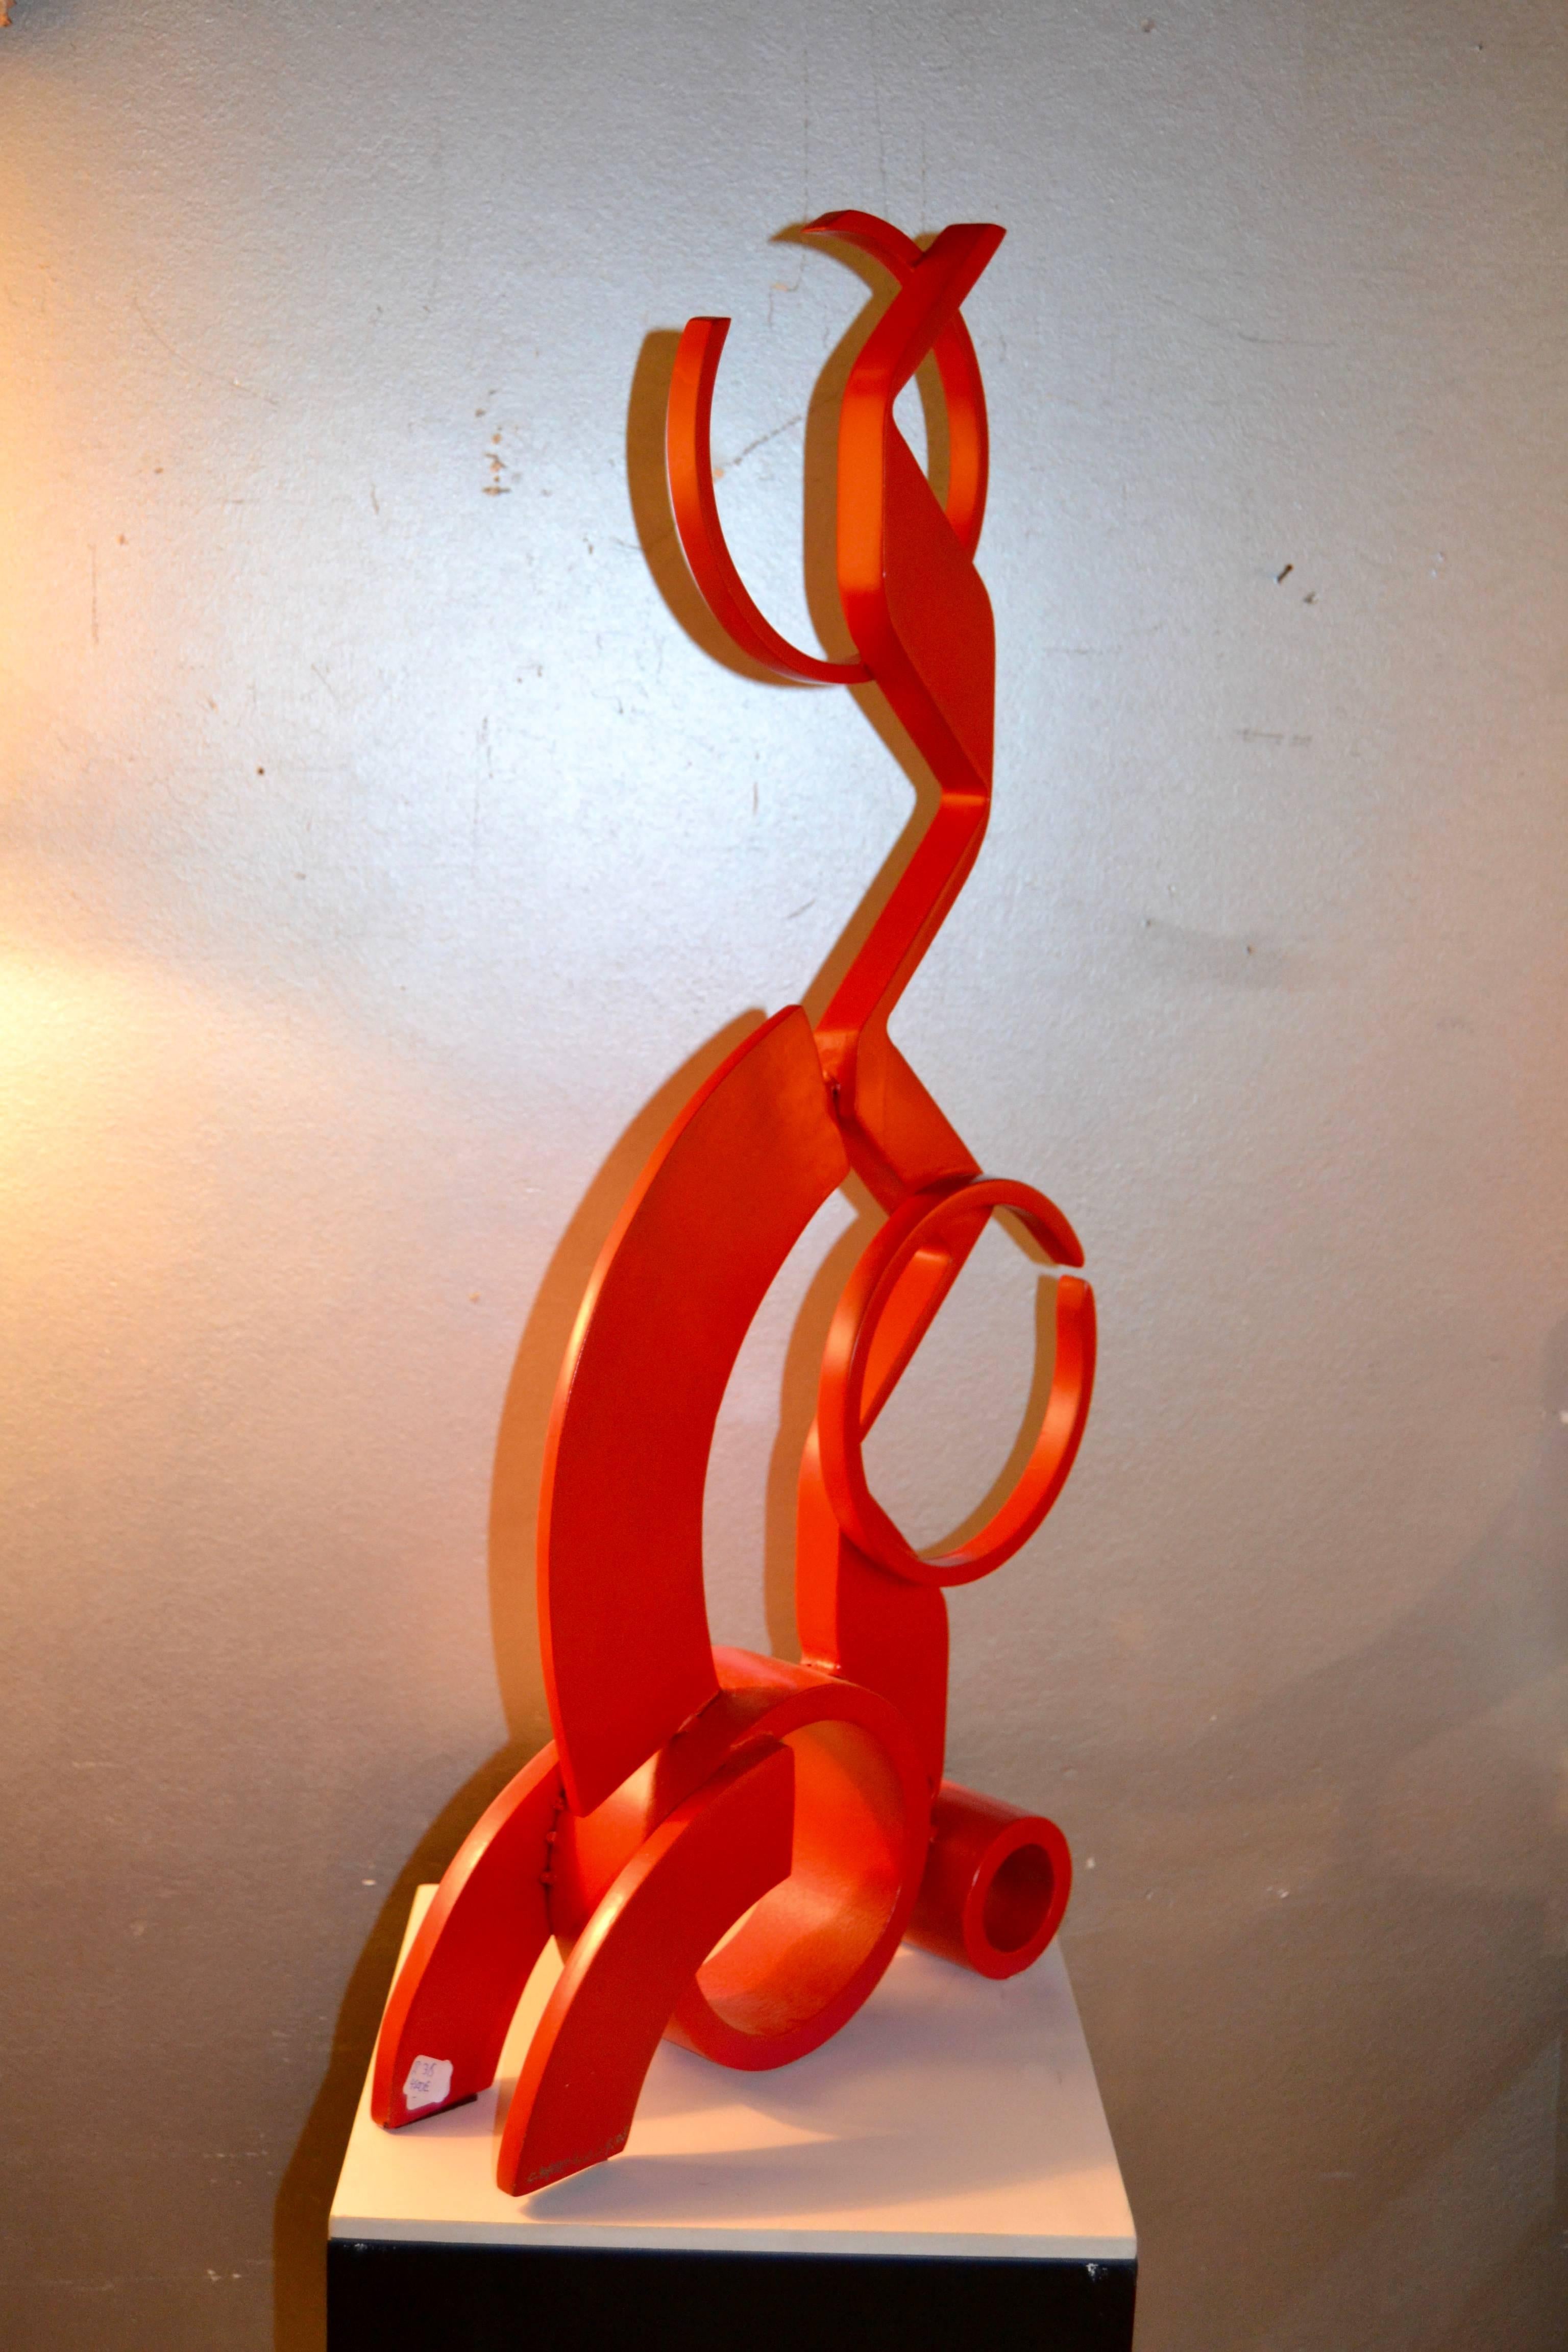 Red Steel Sculpture by Caporicci 1